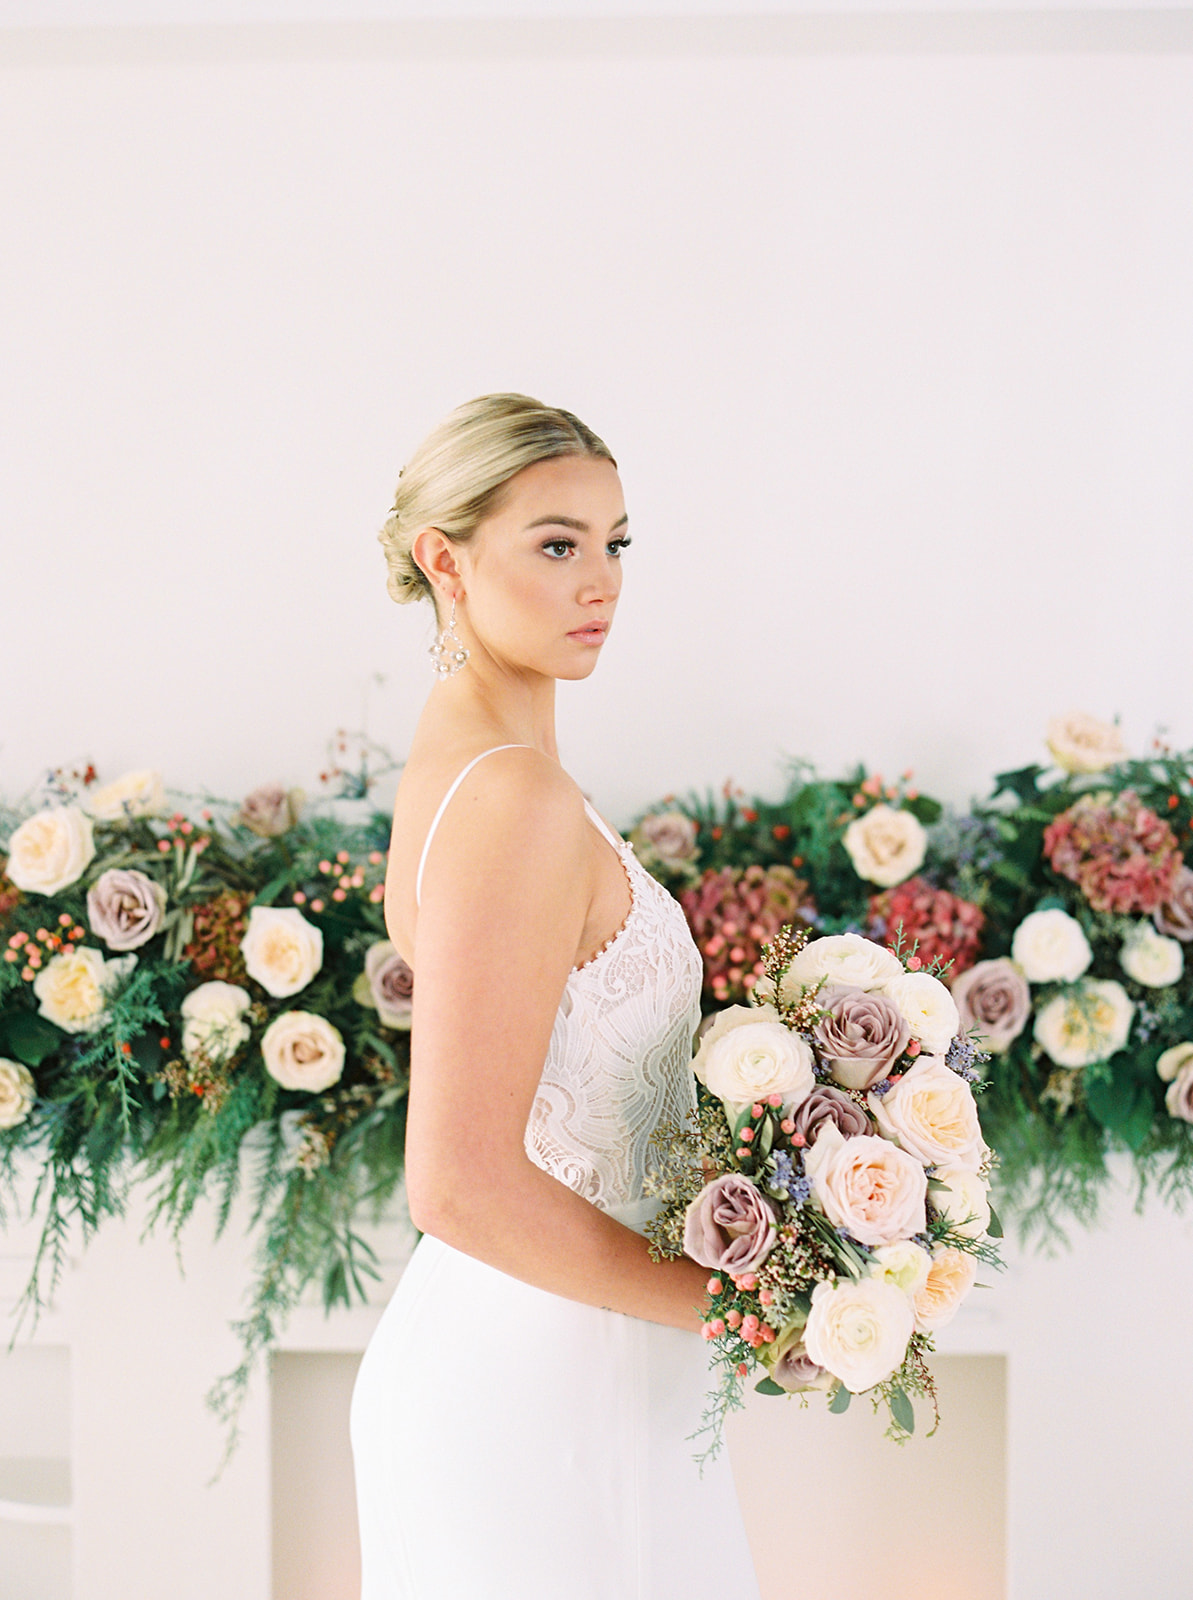 2022 Bridal Trends and Styles